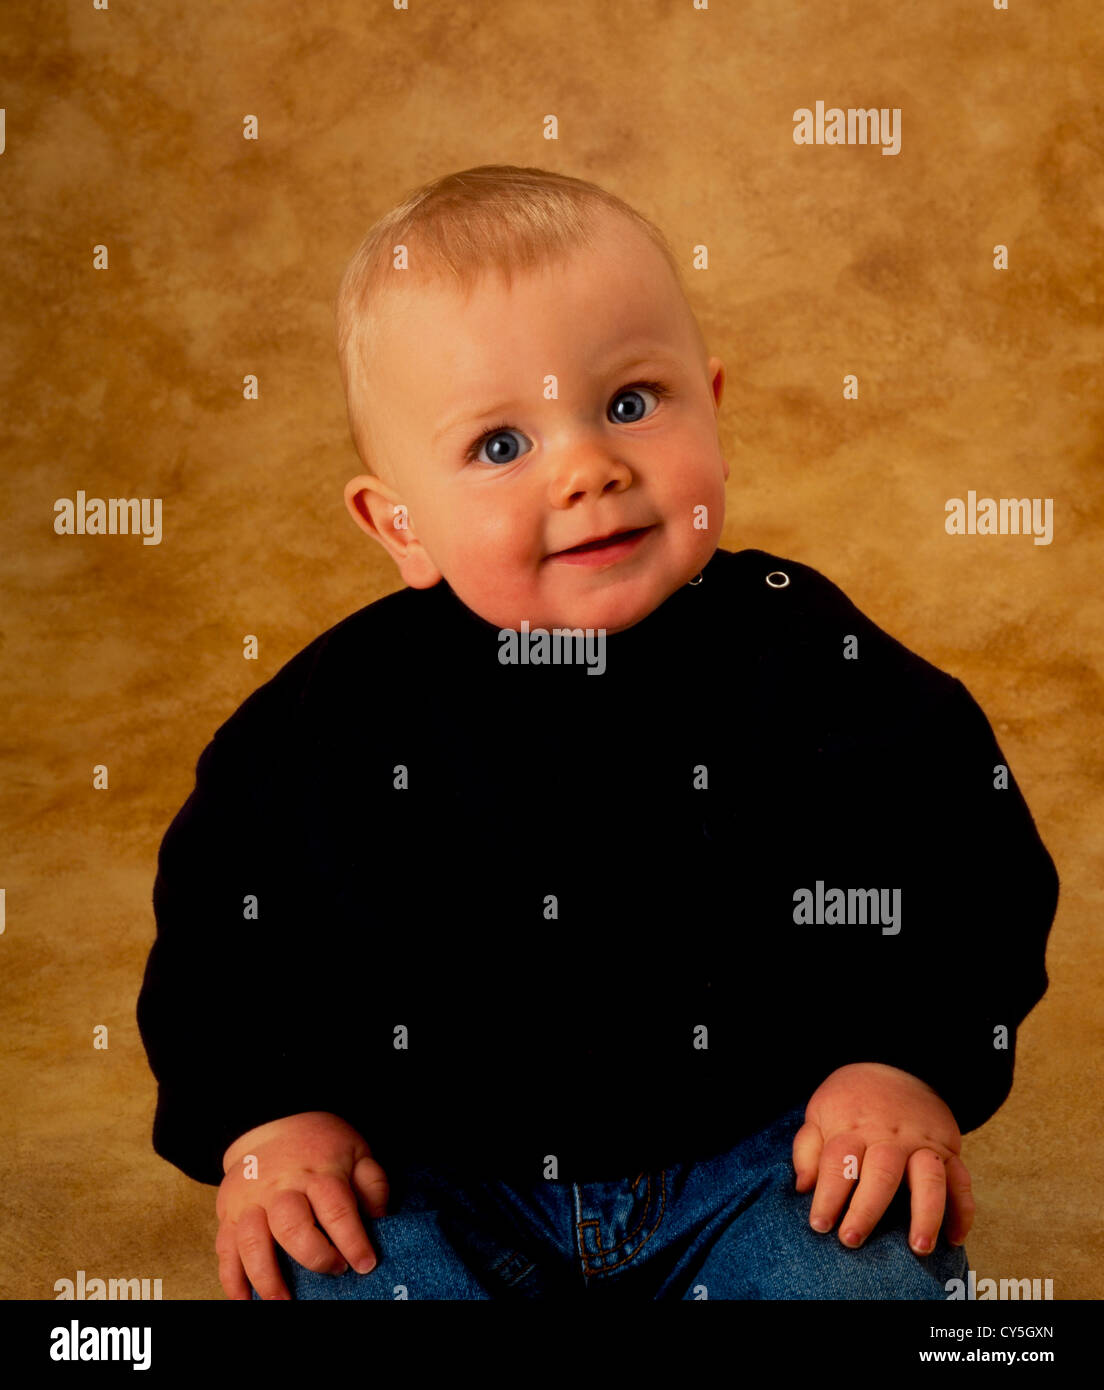 BABY BOY 6 MONTHS OLD Stock Photo